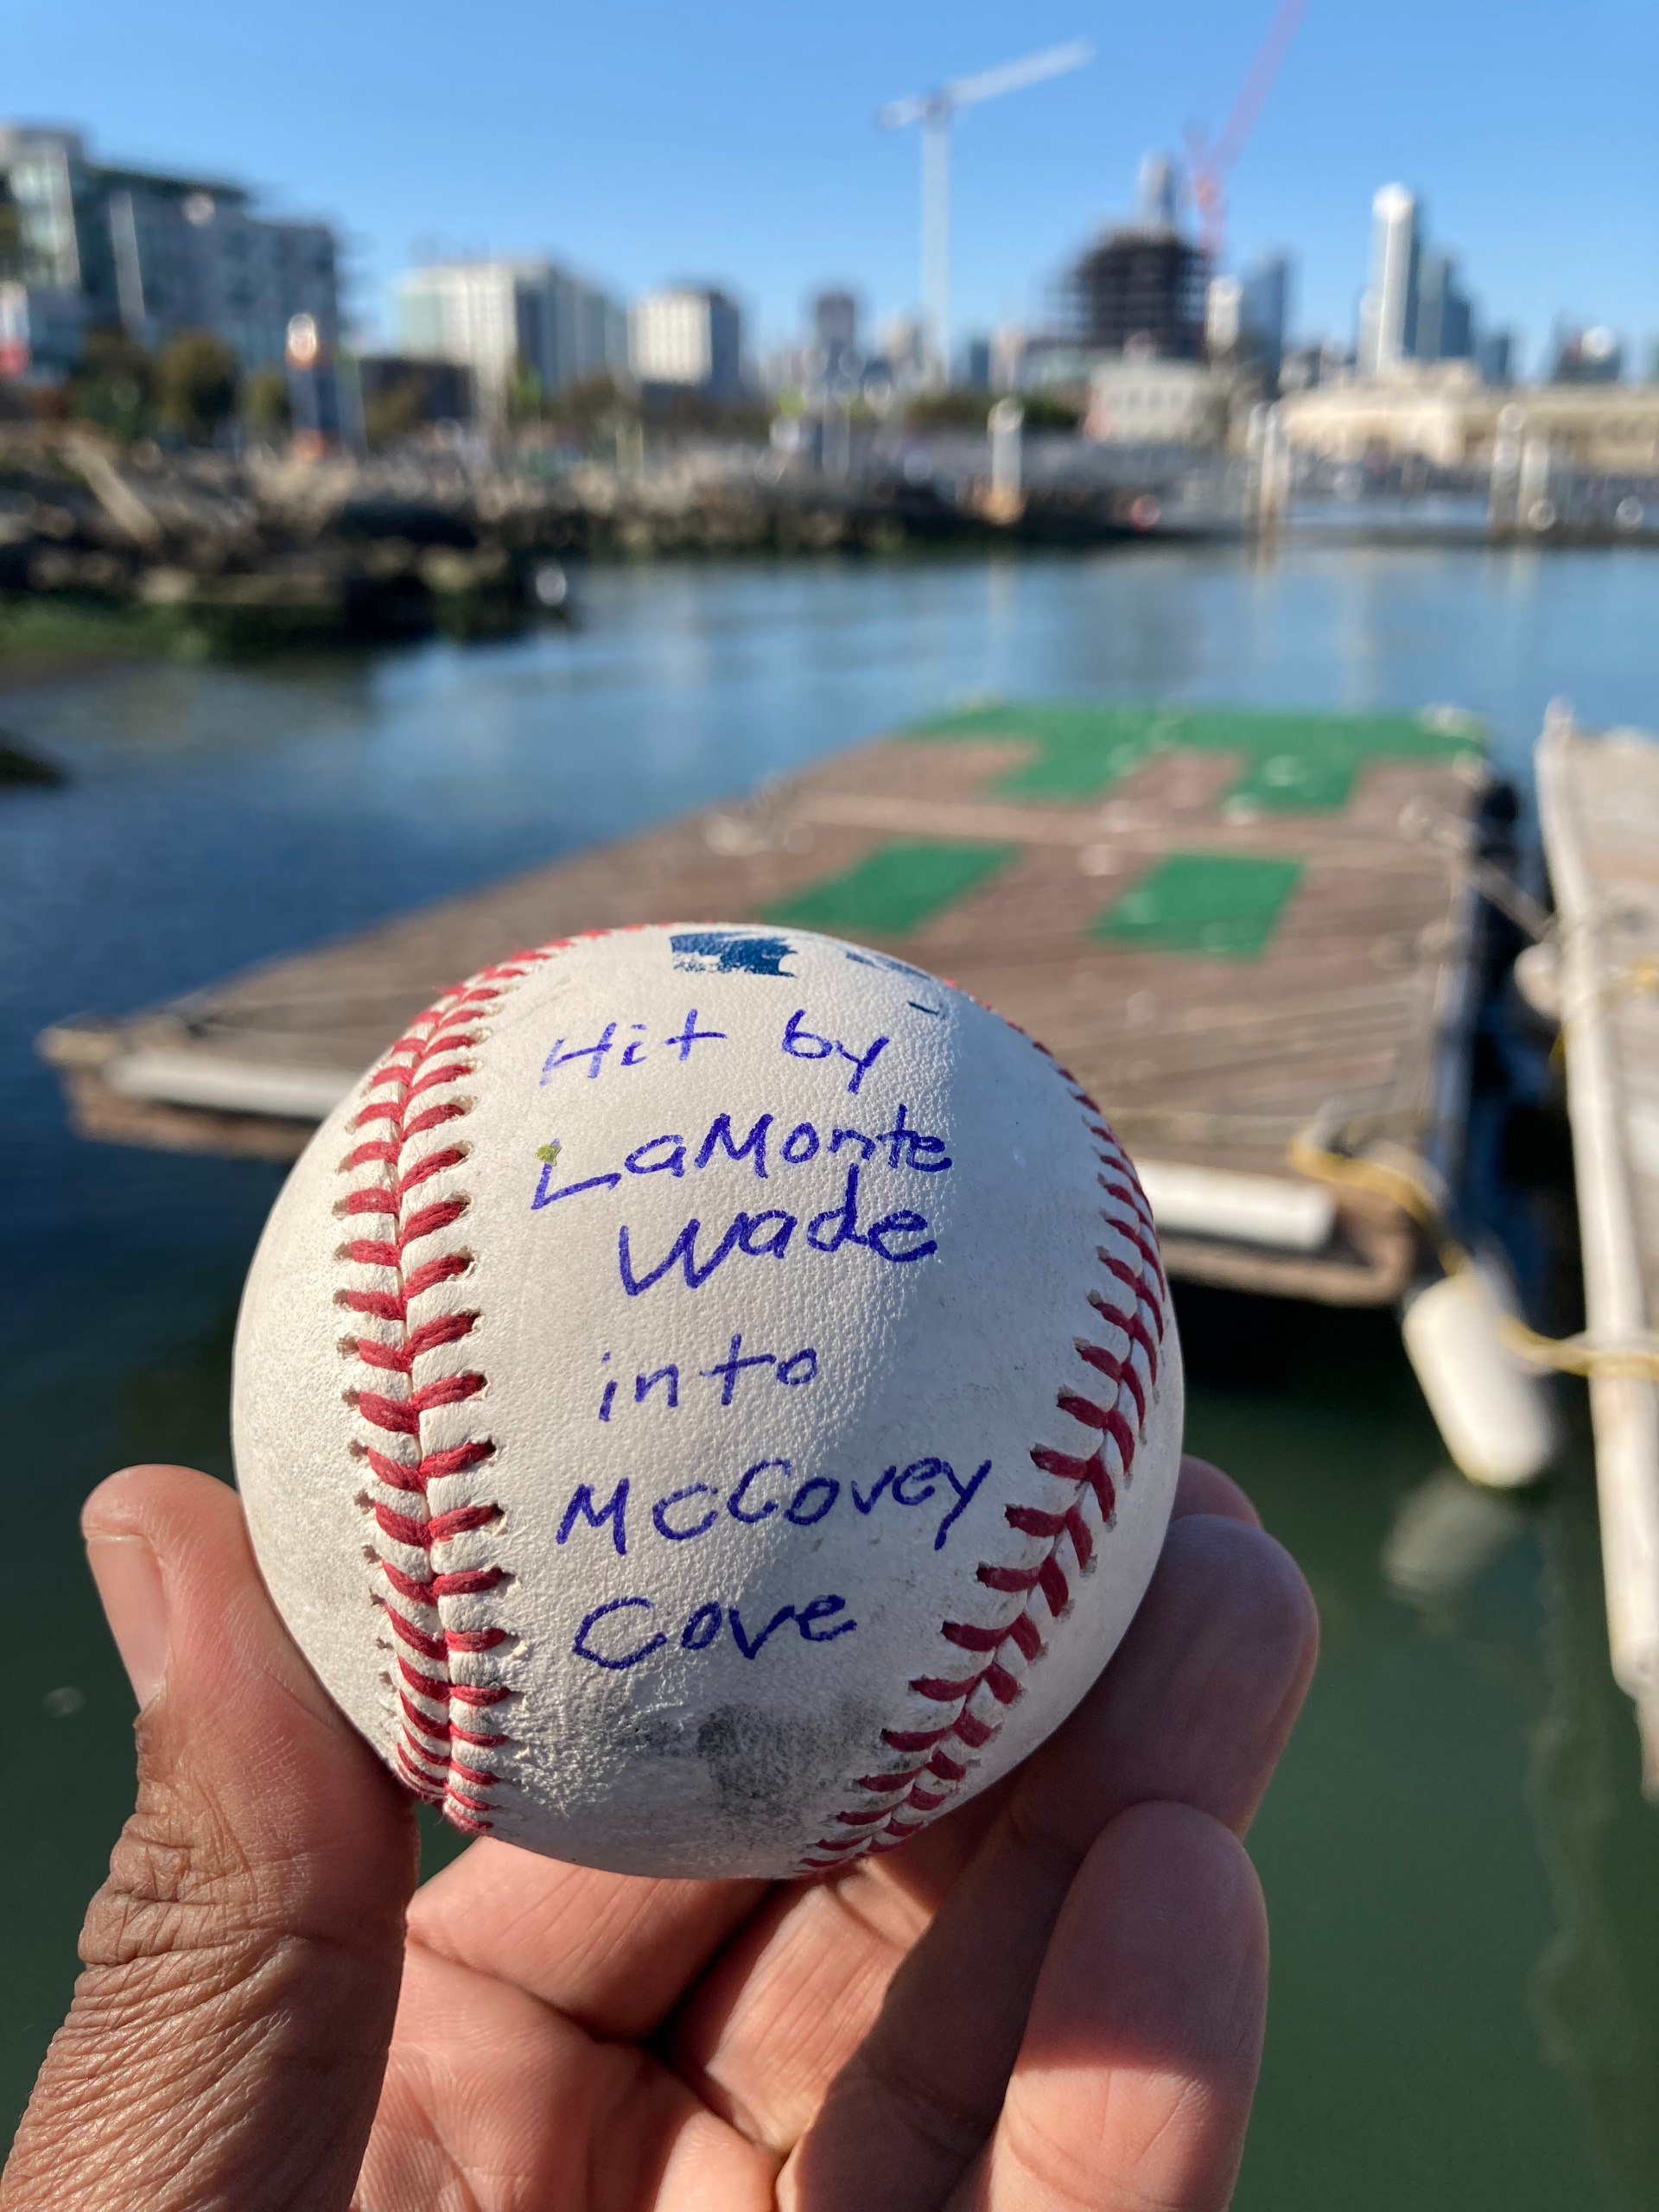 A hand holds a baseball with writing on it that says: "Hit by LaMonte Wade into McCovey Cove." Blurry city landscape with water beyond it.